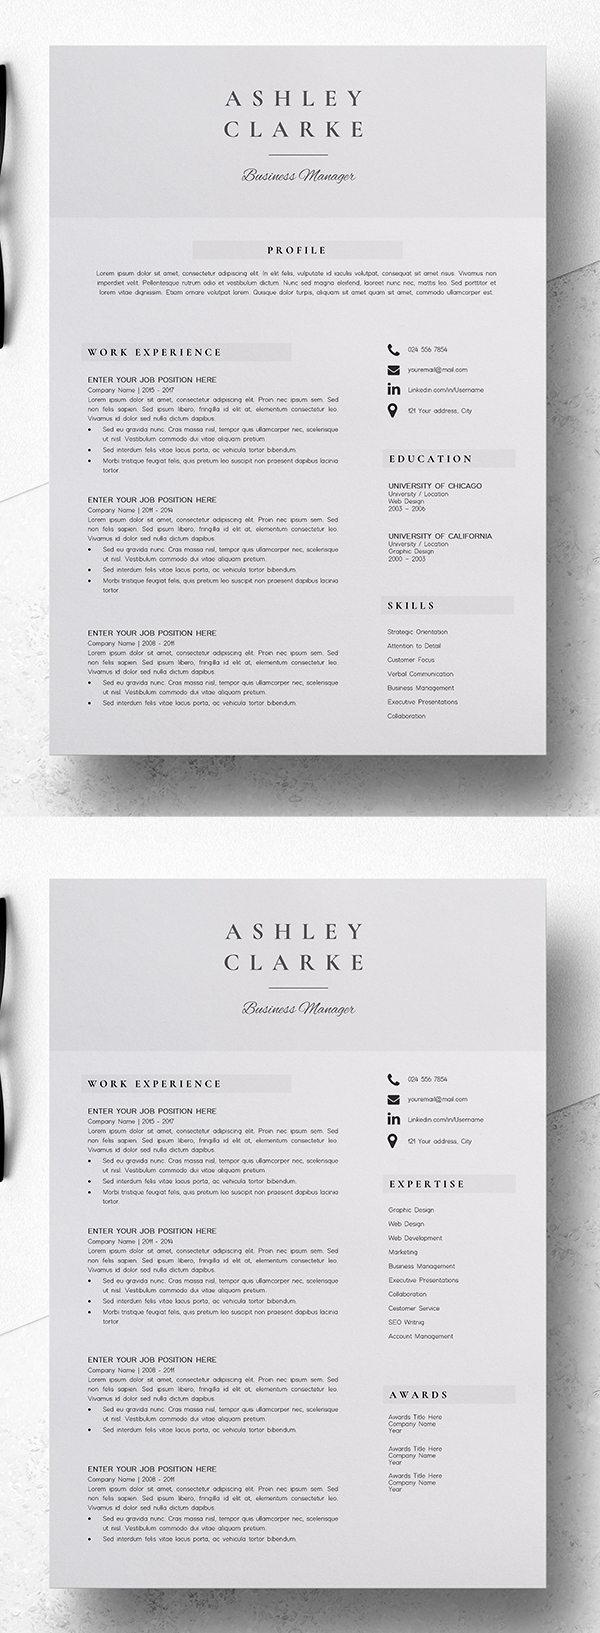 Useful and Professional Resume Templates